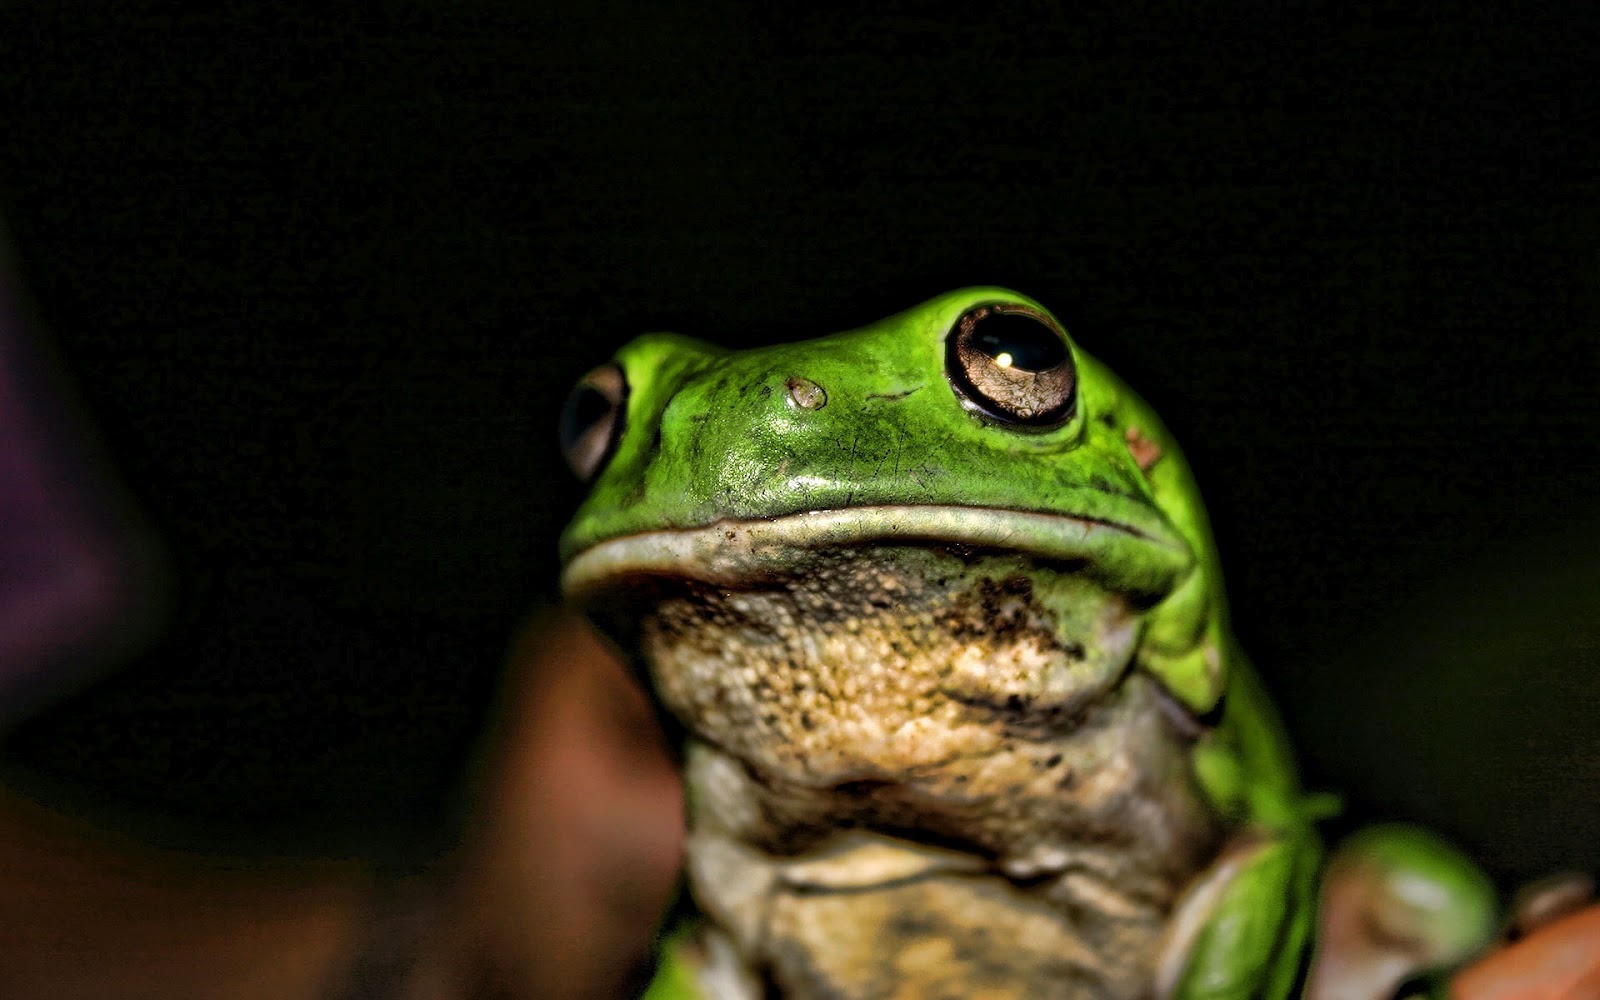  animal wallpaper with a green frog HD frogs wallpapers   backgrounds